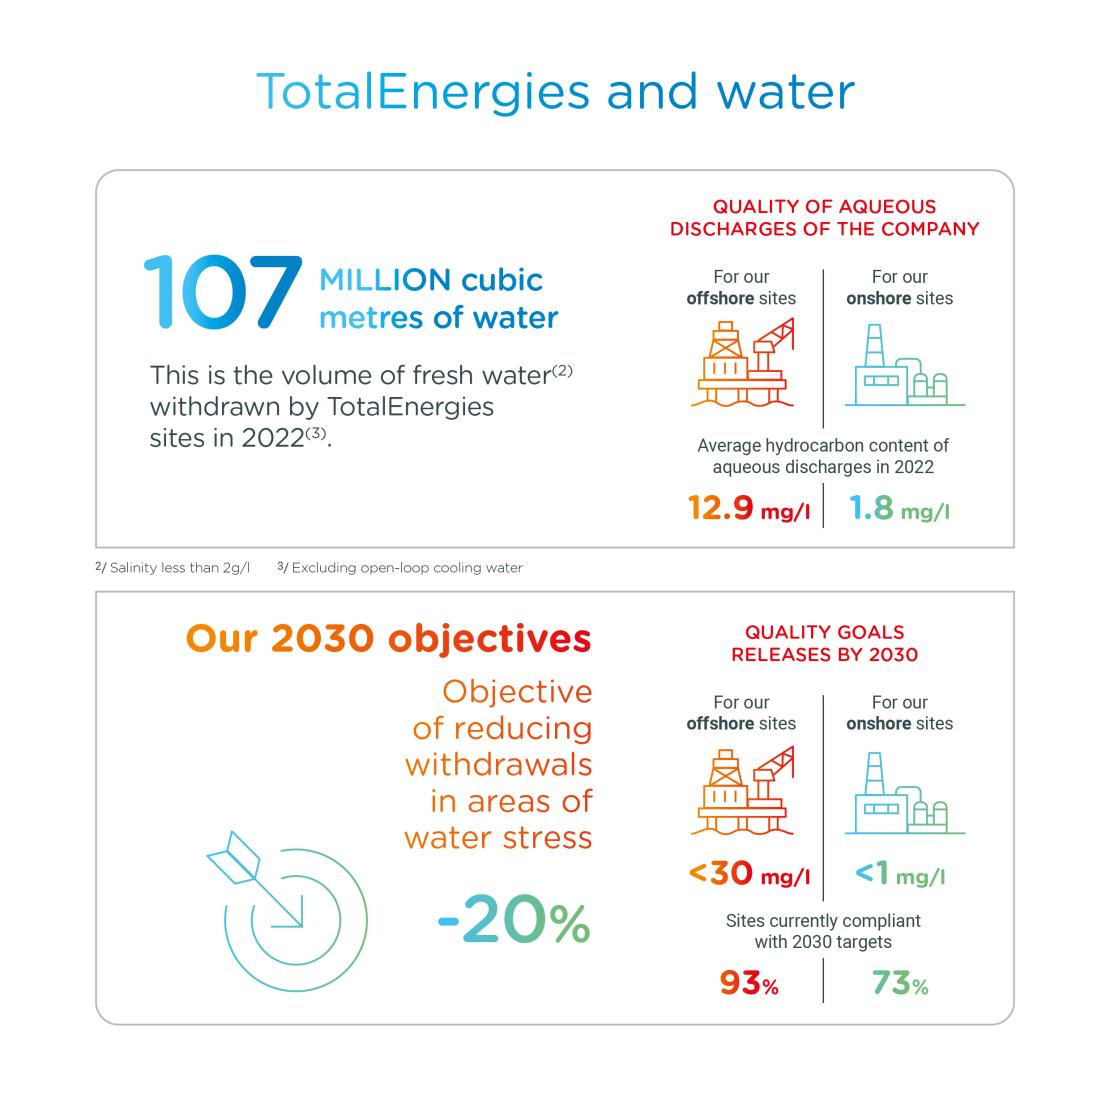 Infographics "TotalEnergies and water" - see detailed description hereafter